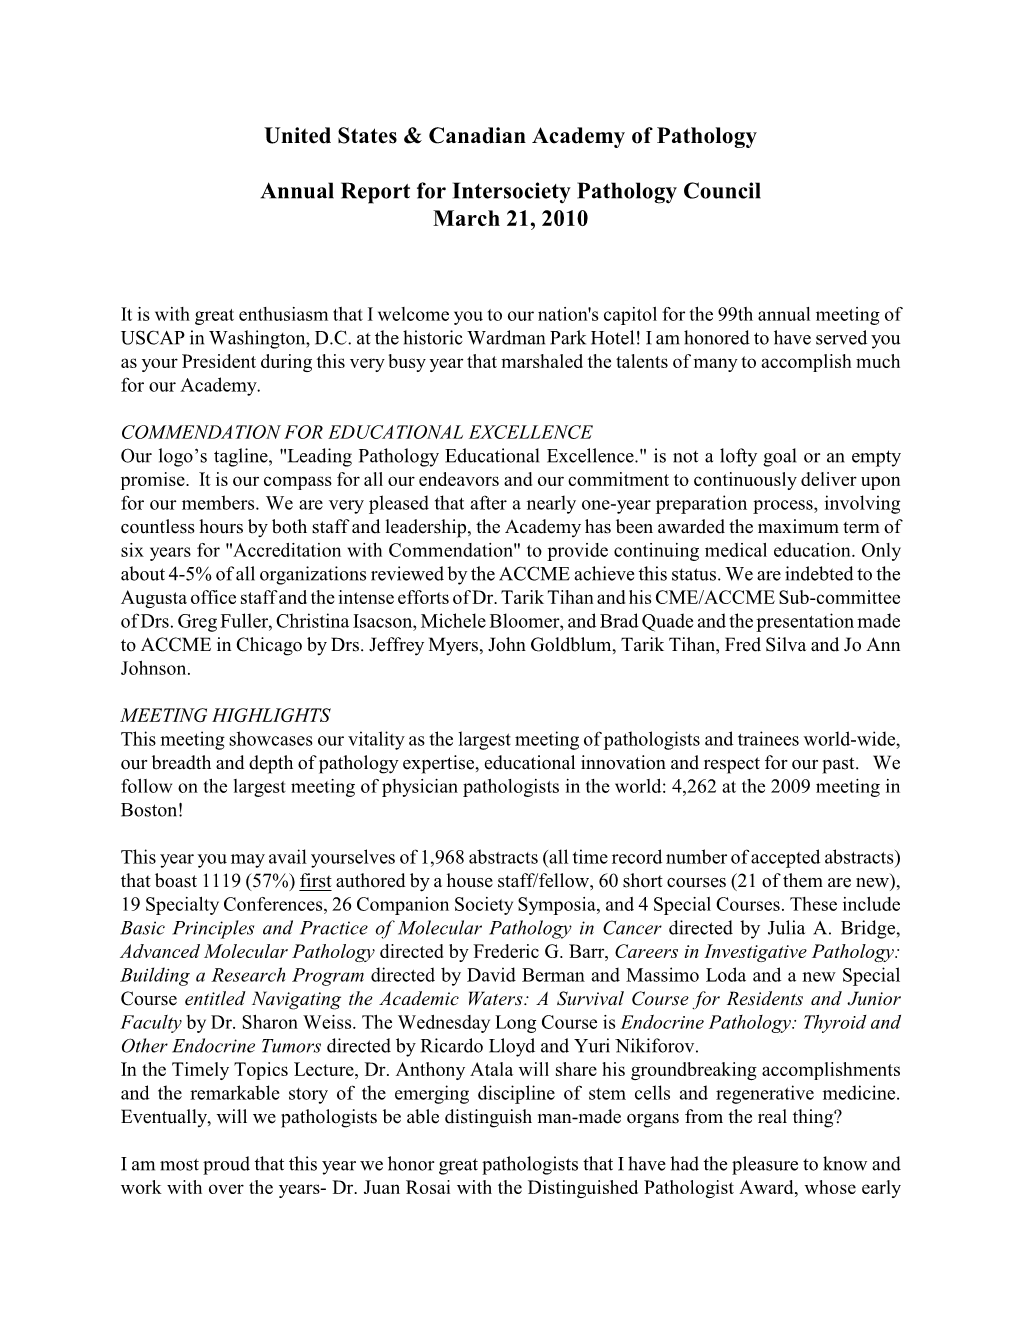 United States & Canadian Academy of Pathology Annual Report for Intersociety Pathology Council March 21, 2010